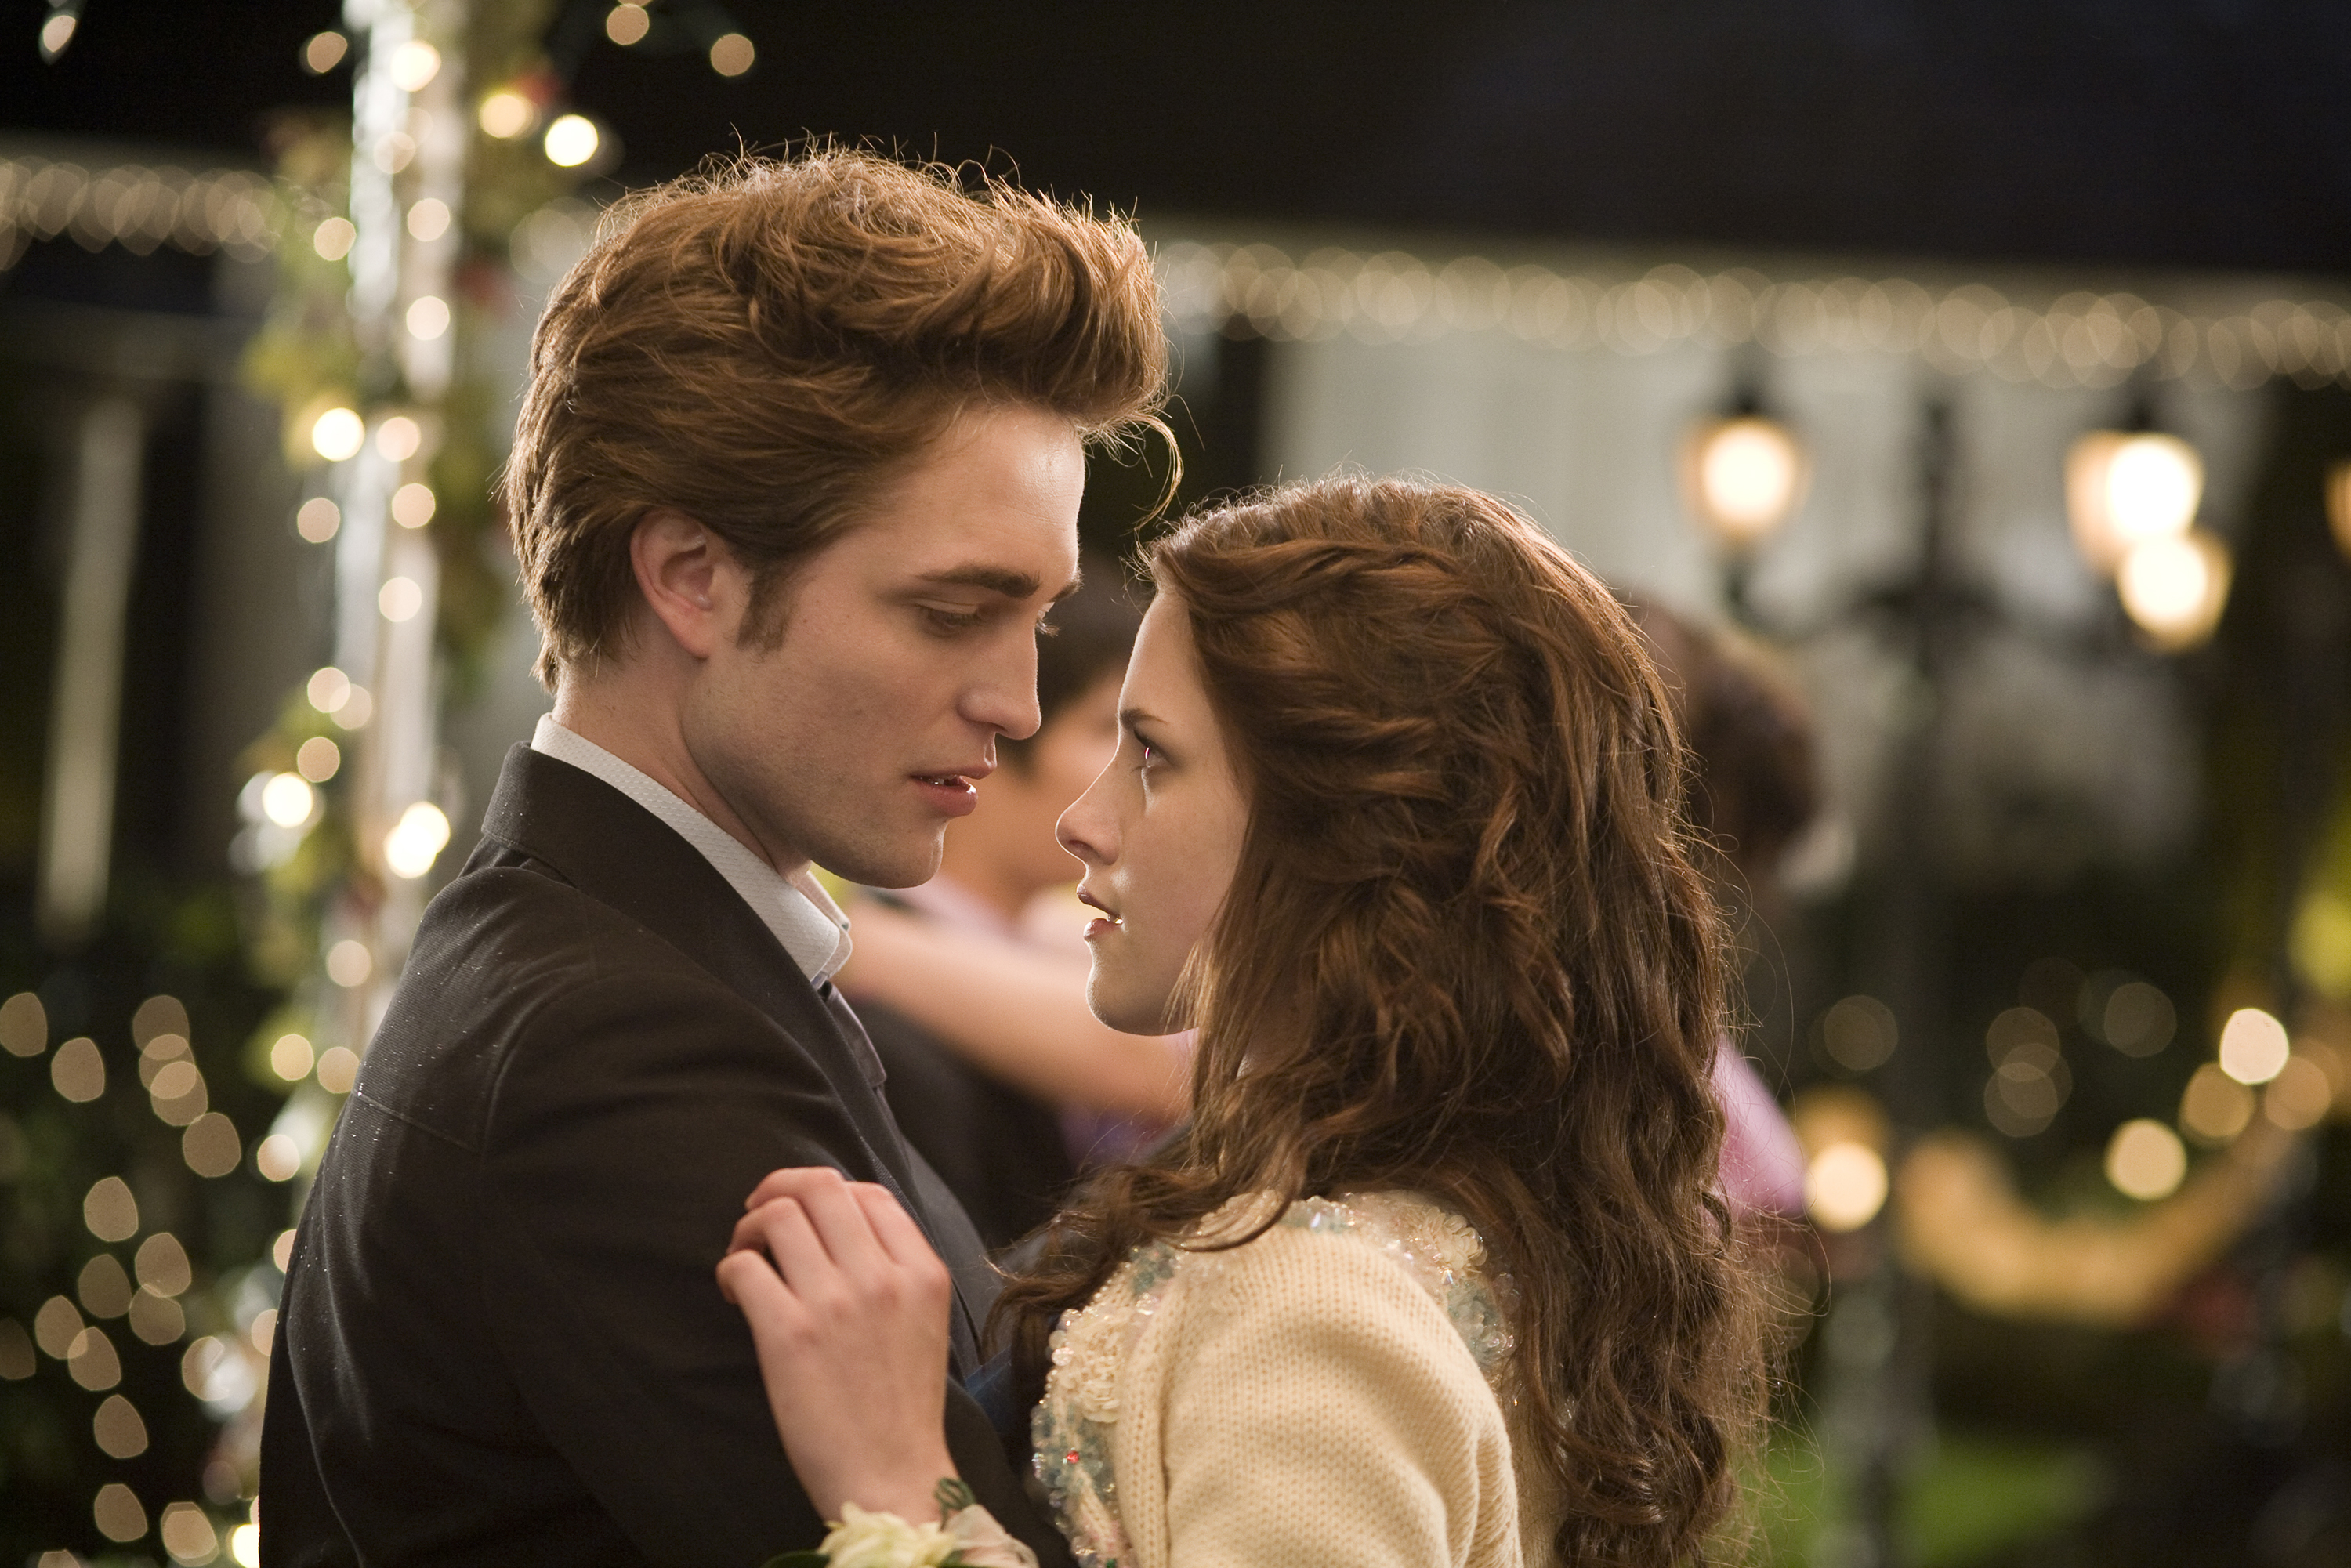 Twilight' to be revived in Facebook short films - The Boston Globe